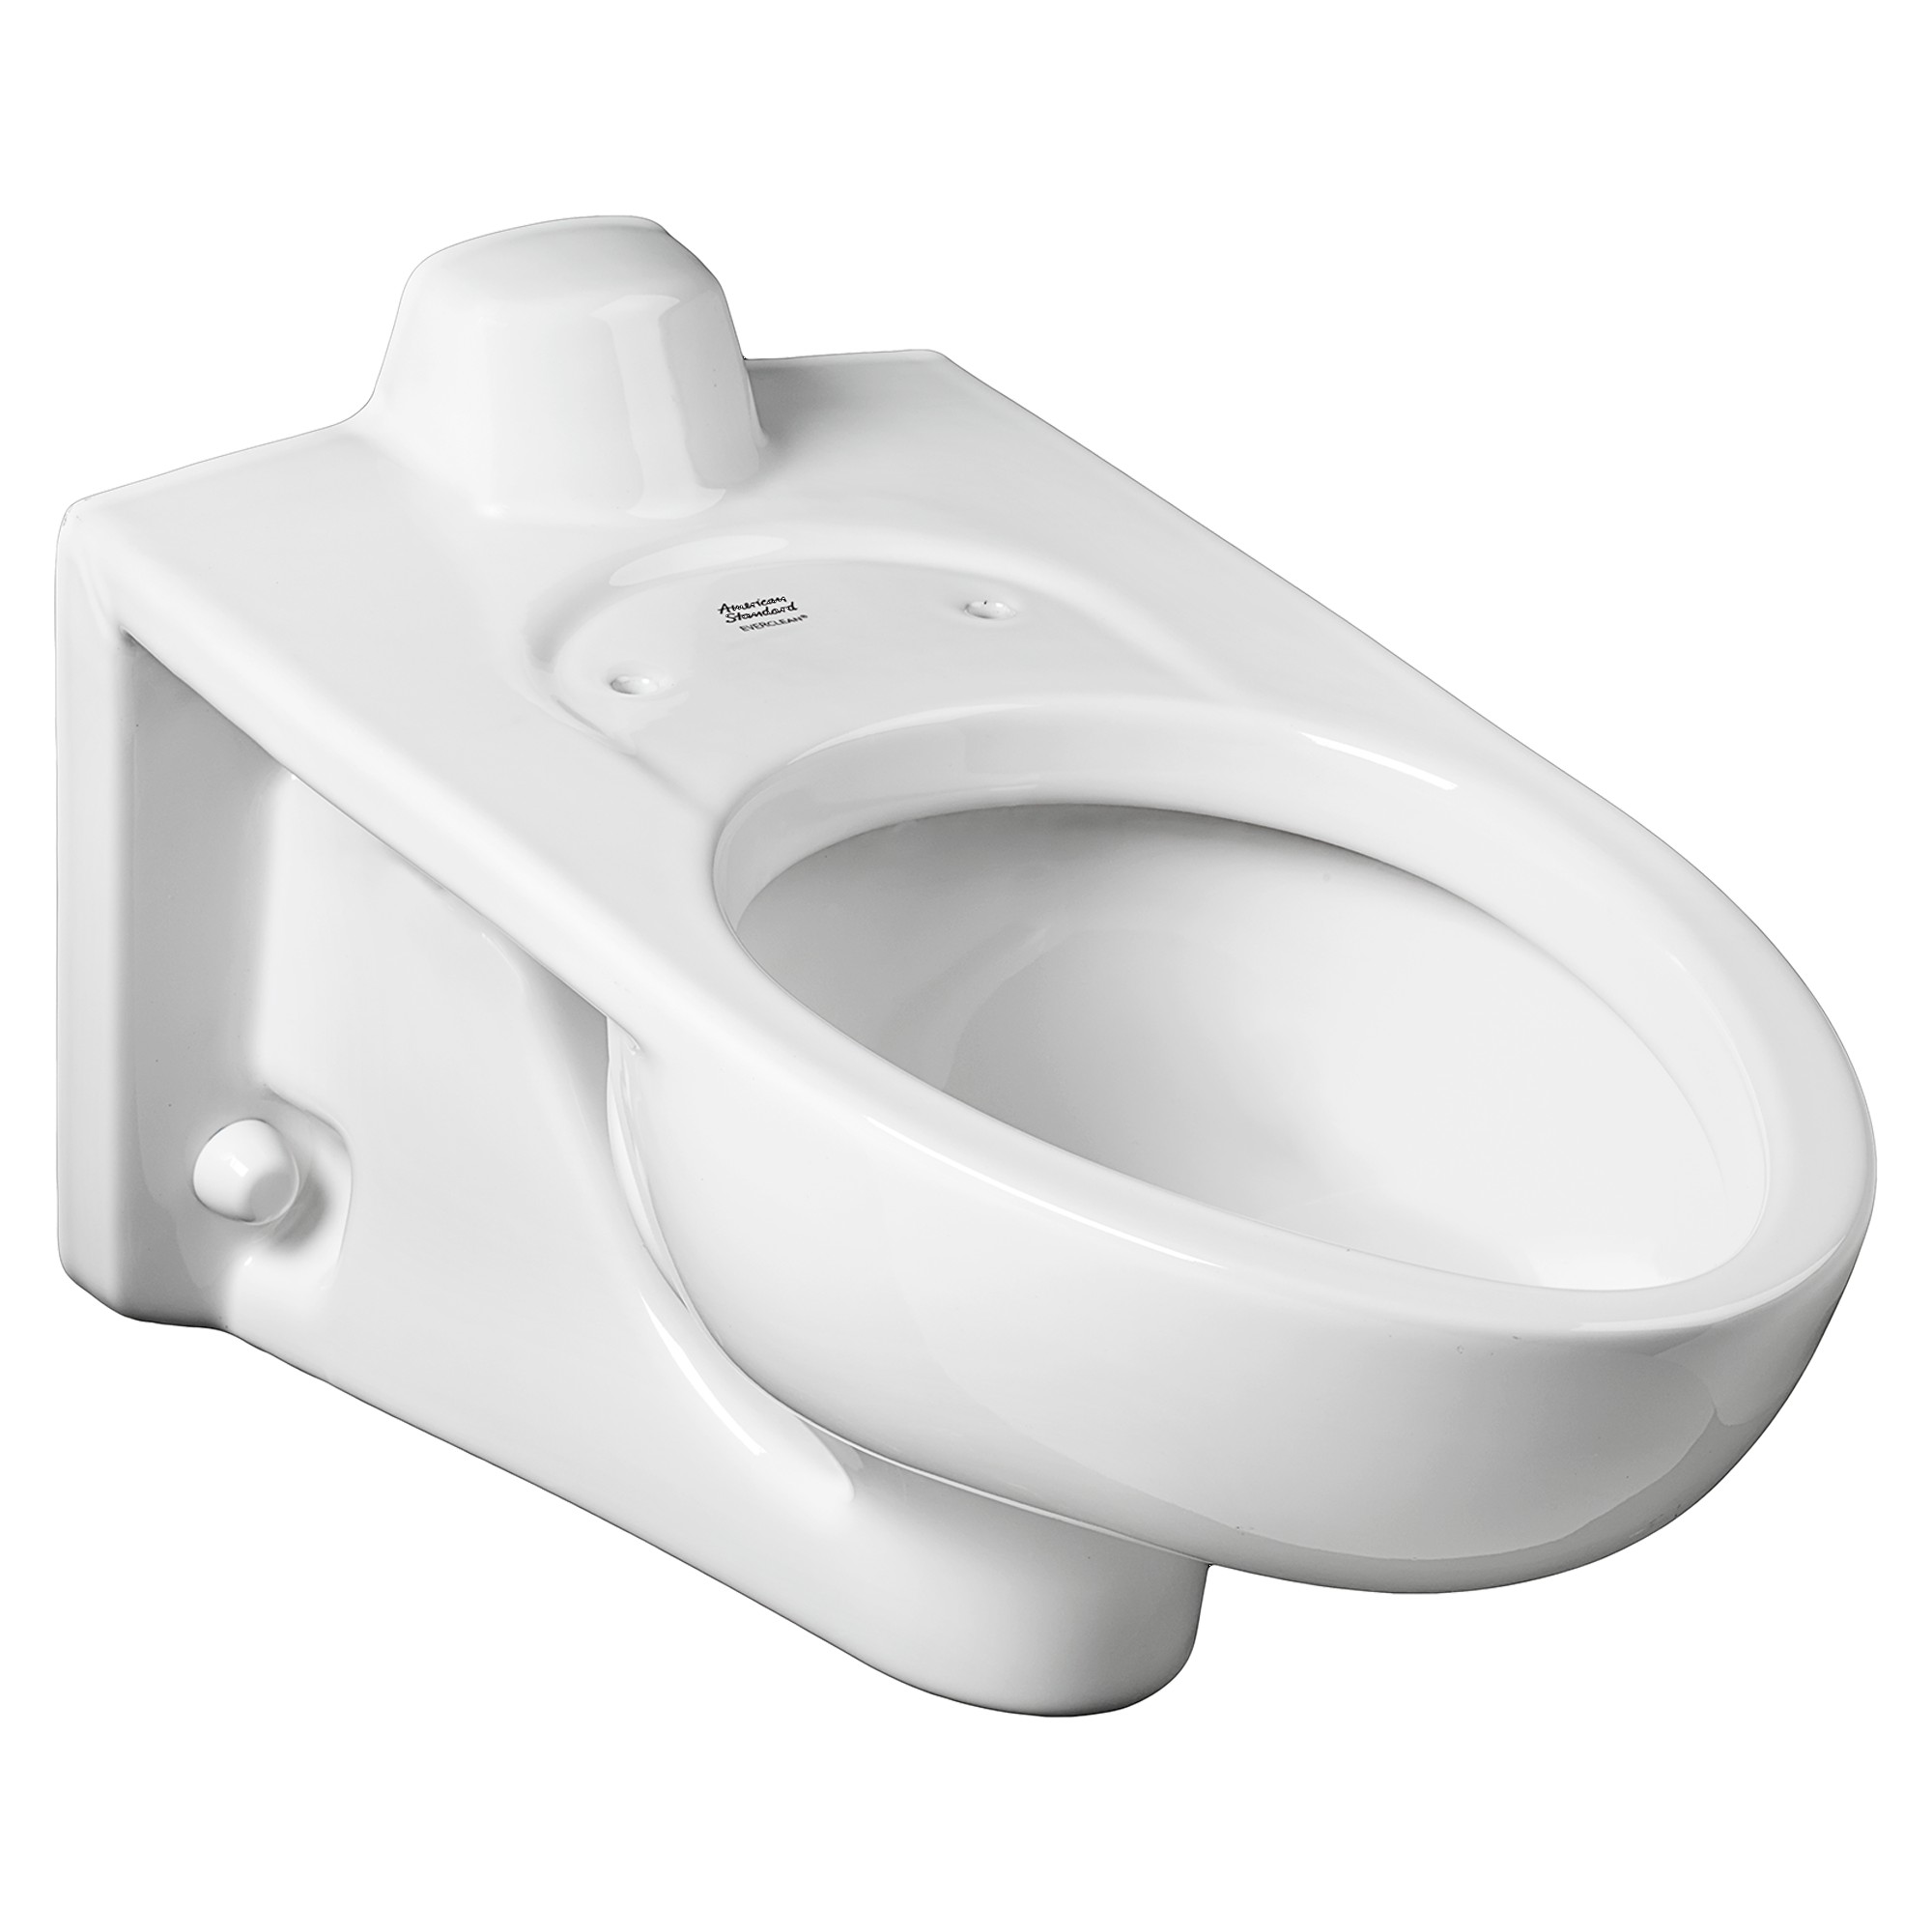 American Standard | 3353.101.020 | AMERICAN STANDARD 3353.101 AFWALL ELONGATED BACK SPUD FLUSHOMETER BOWL WITH EVERCLEAN WH 020 WHITE 1.1-1.28-1.6GPF HET